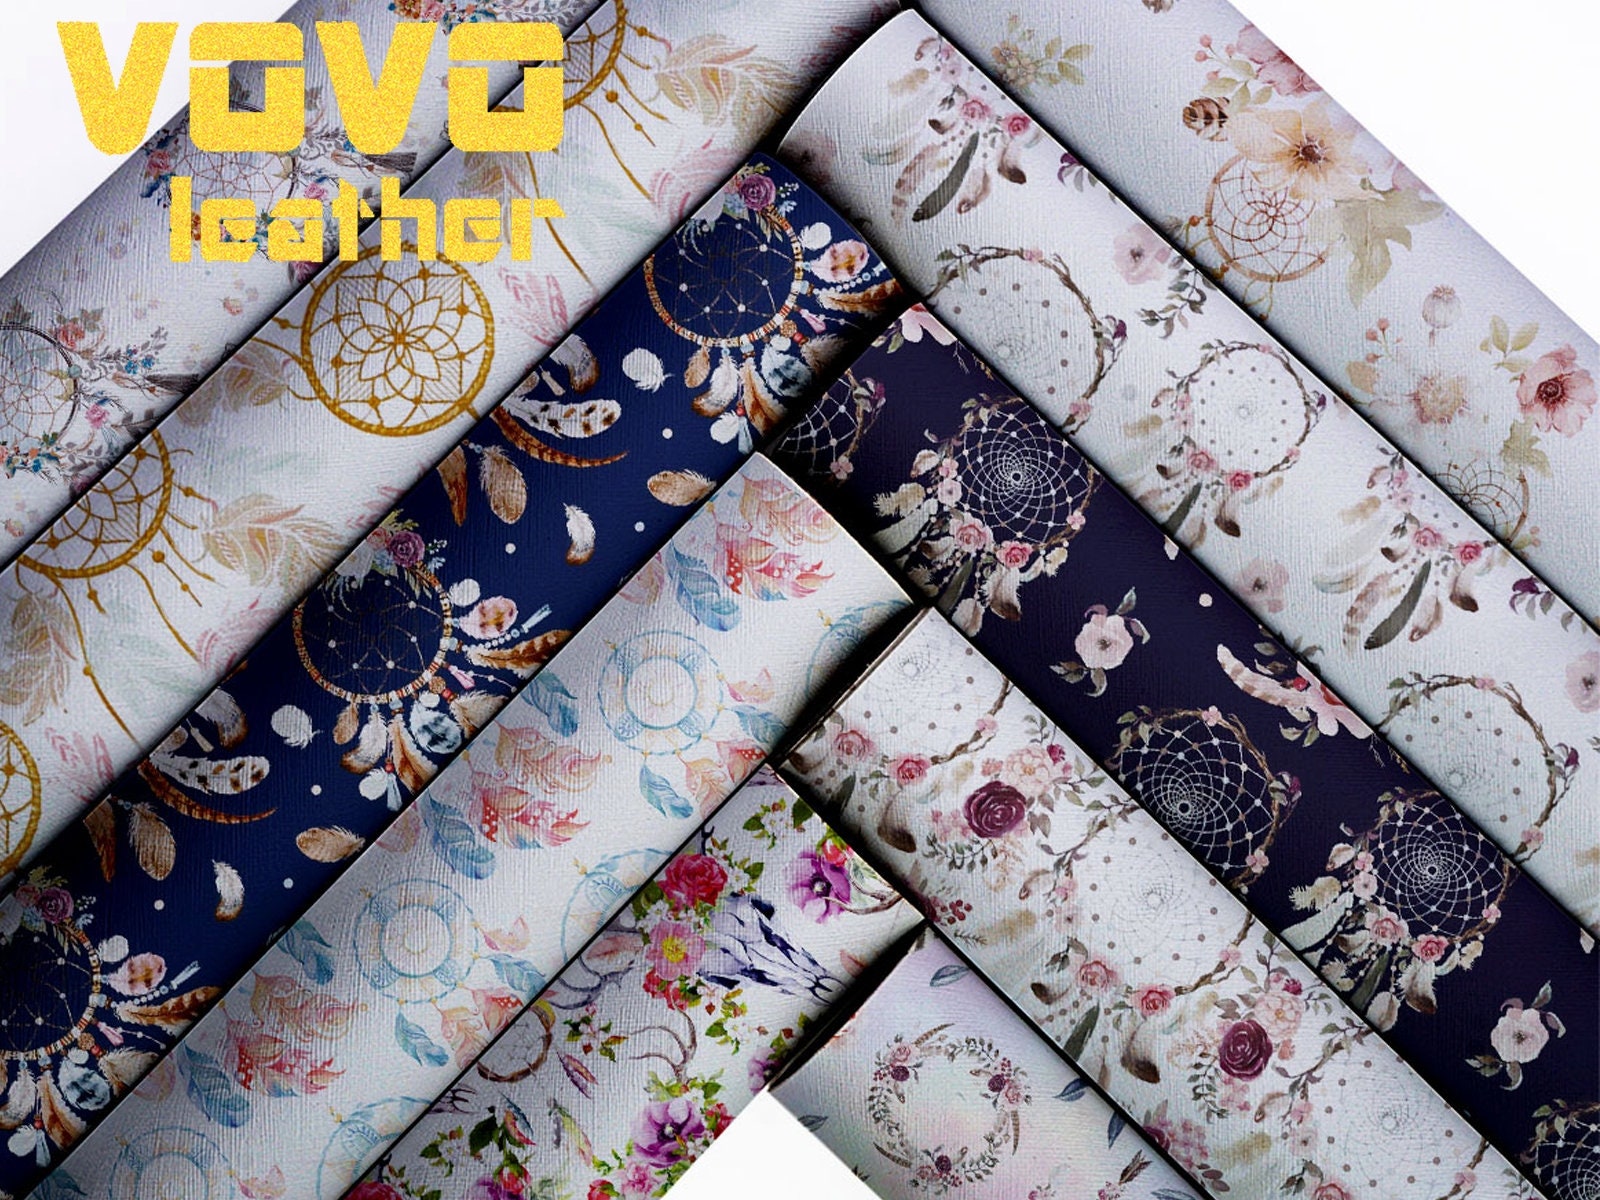 Designer Gucci Fabrics for Shoes and Bags Materials. BYXC0603